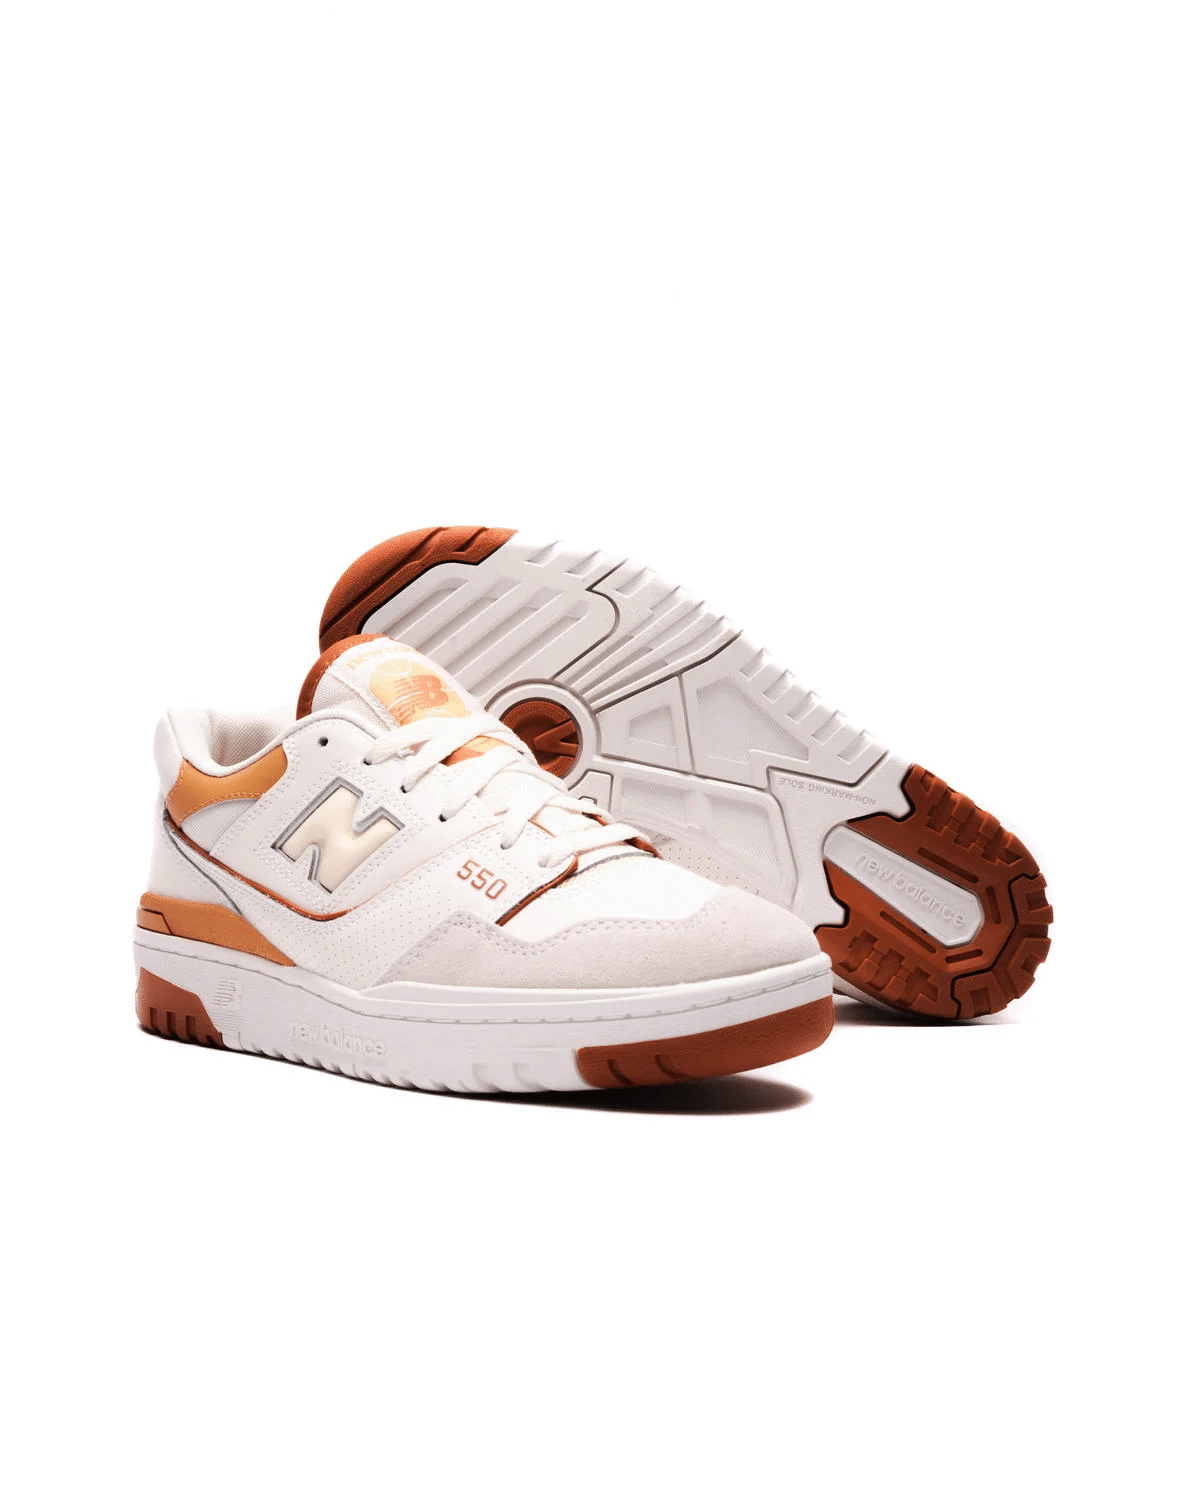 New Balance Has Designed Two 550s in Café Au Lait and Pink